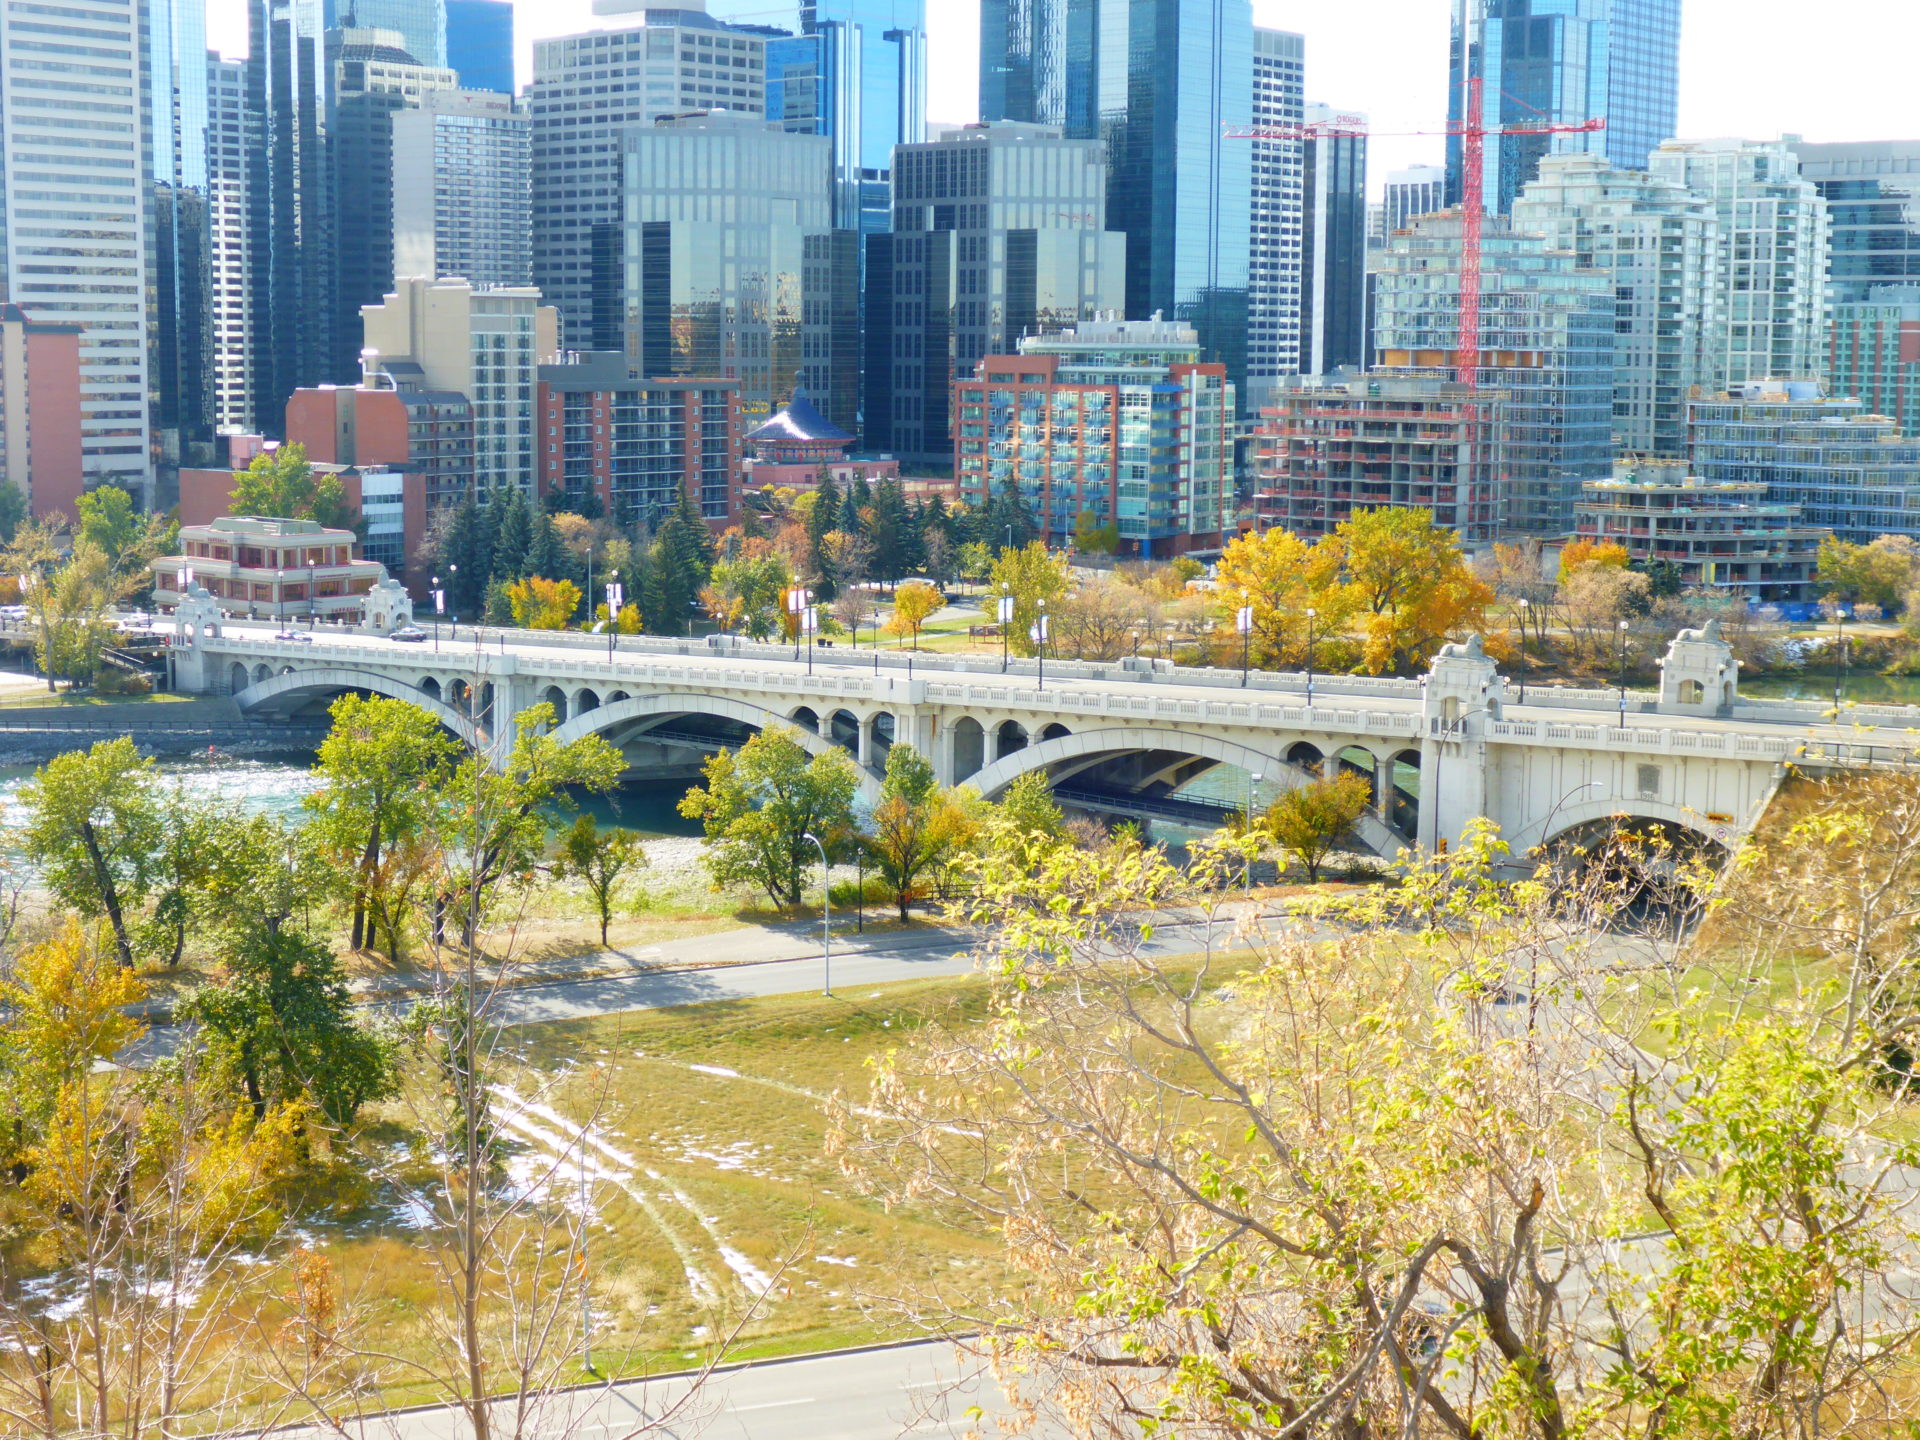 Unhindered views of downtown Calgary, the Bow River, and Centre Street Bridge await you from Rotary Park.